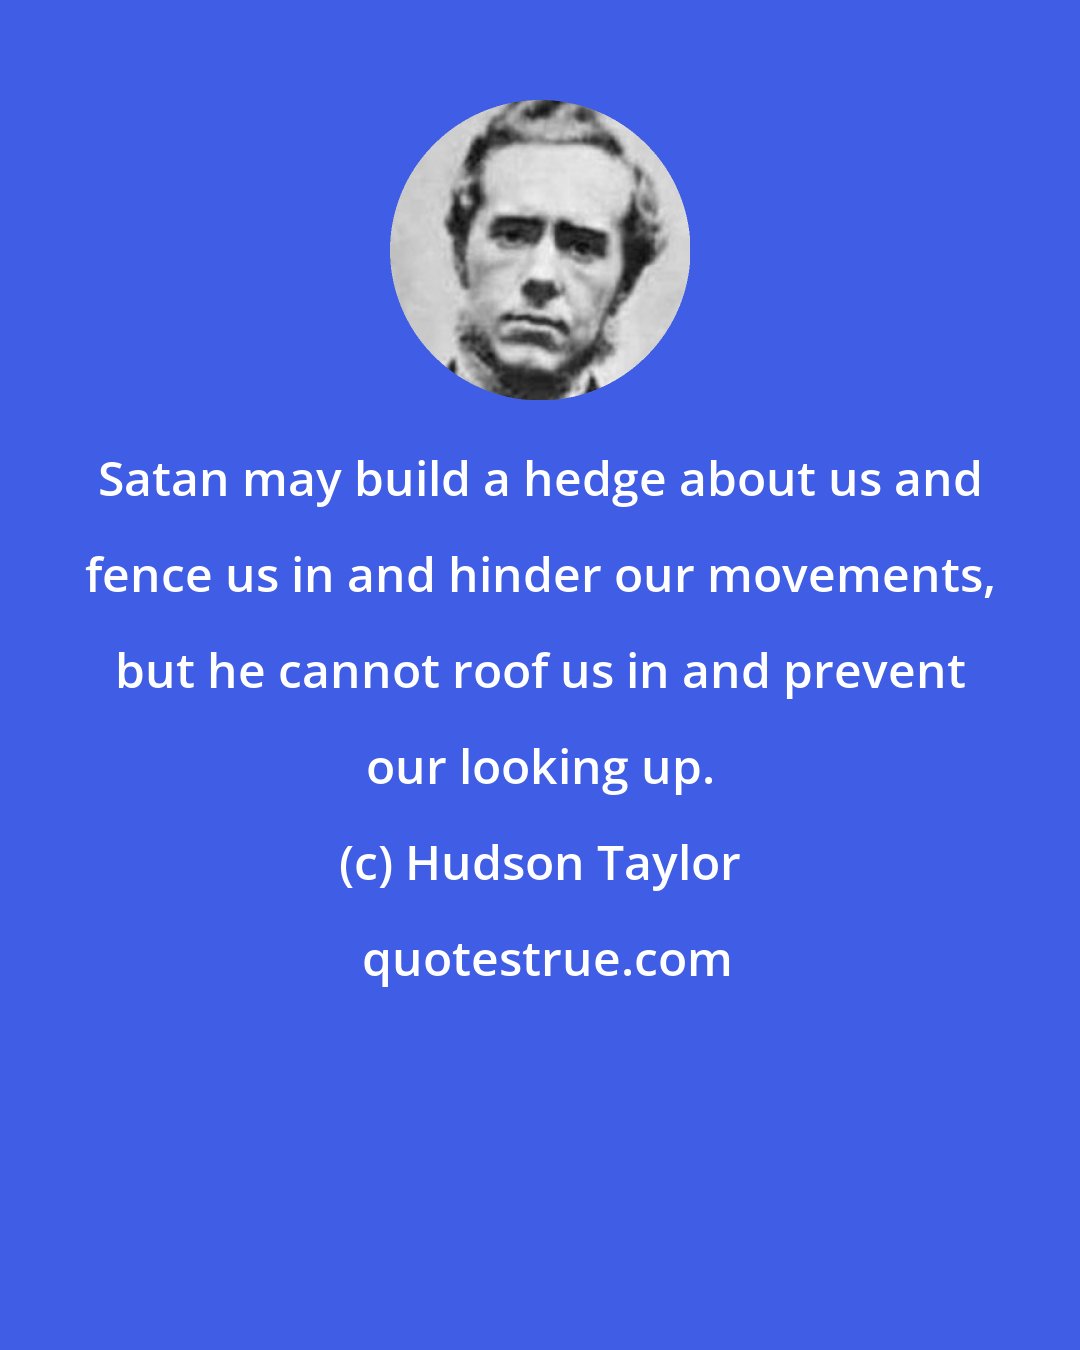 Hudson Taylor: Satan may build a hedge about us and fence us in and hinder our movements, but he cannot roof us in and prevent our looking up.